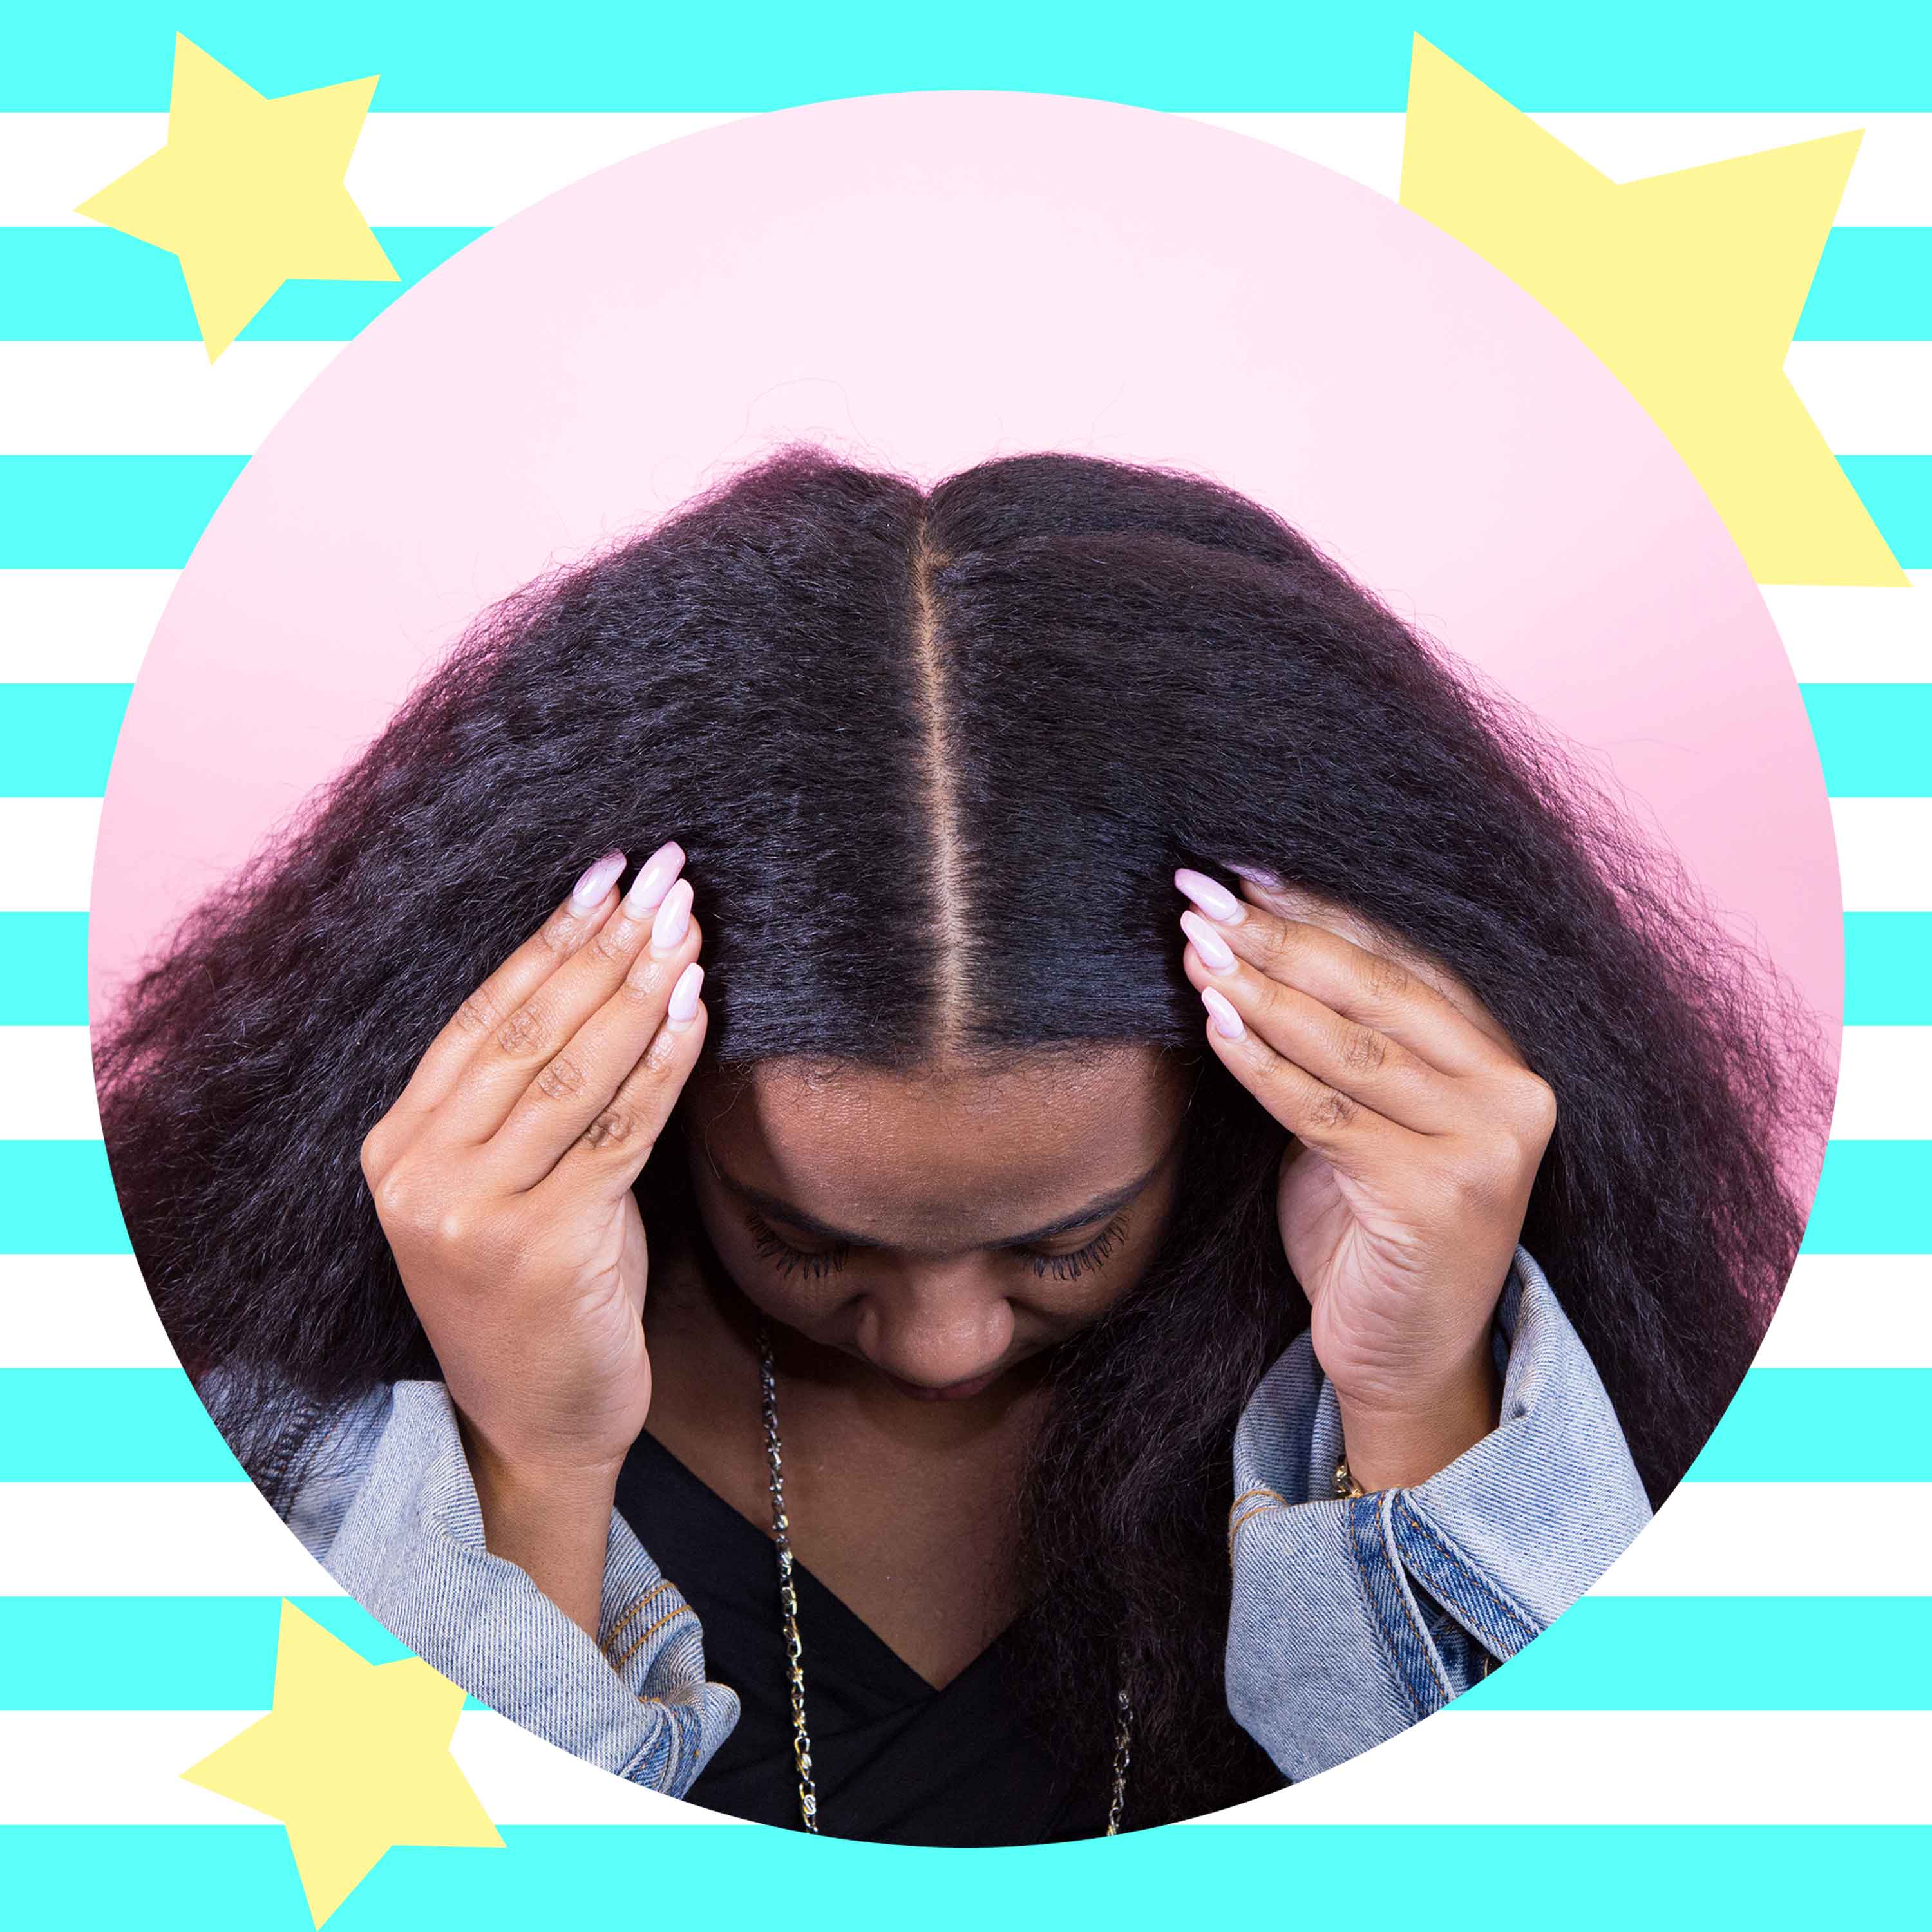 You Need This Braided Ponytail Tutorial For Festival Season
